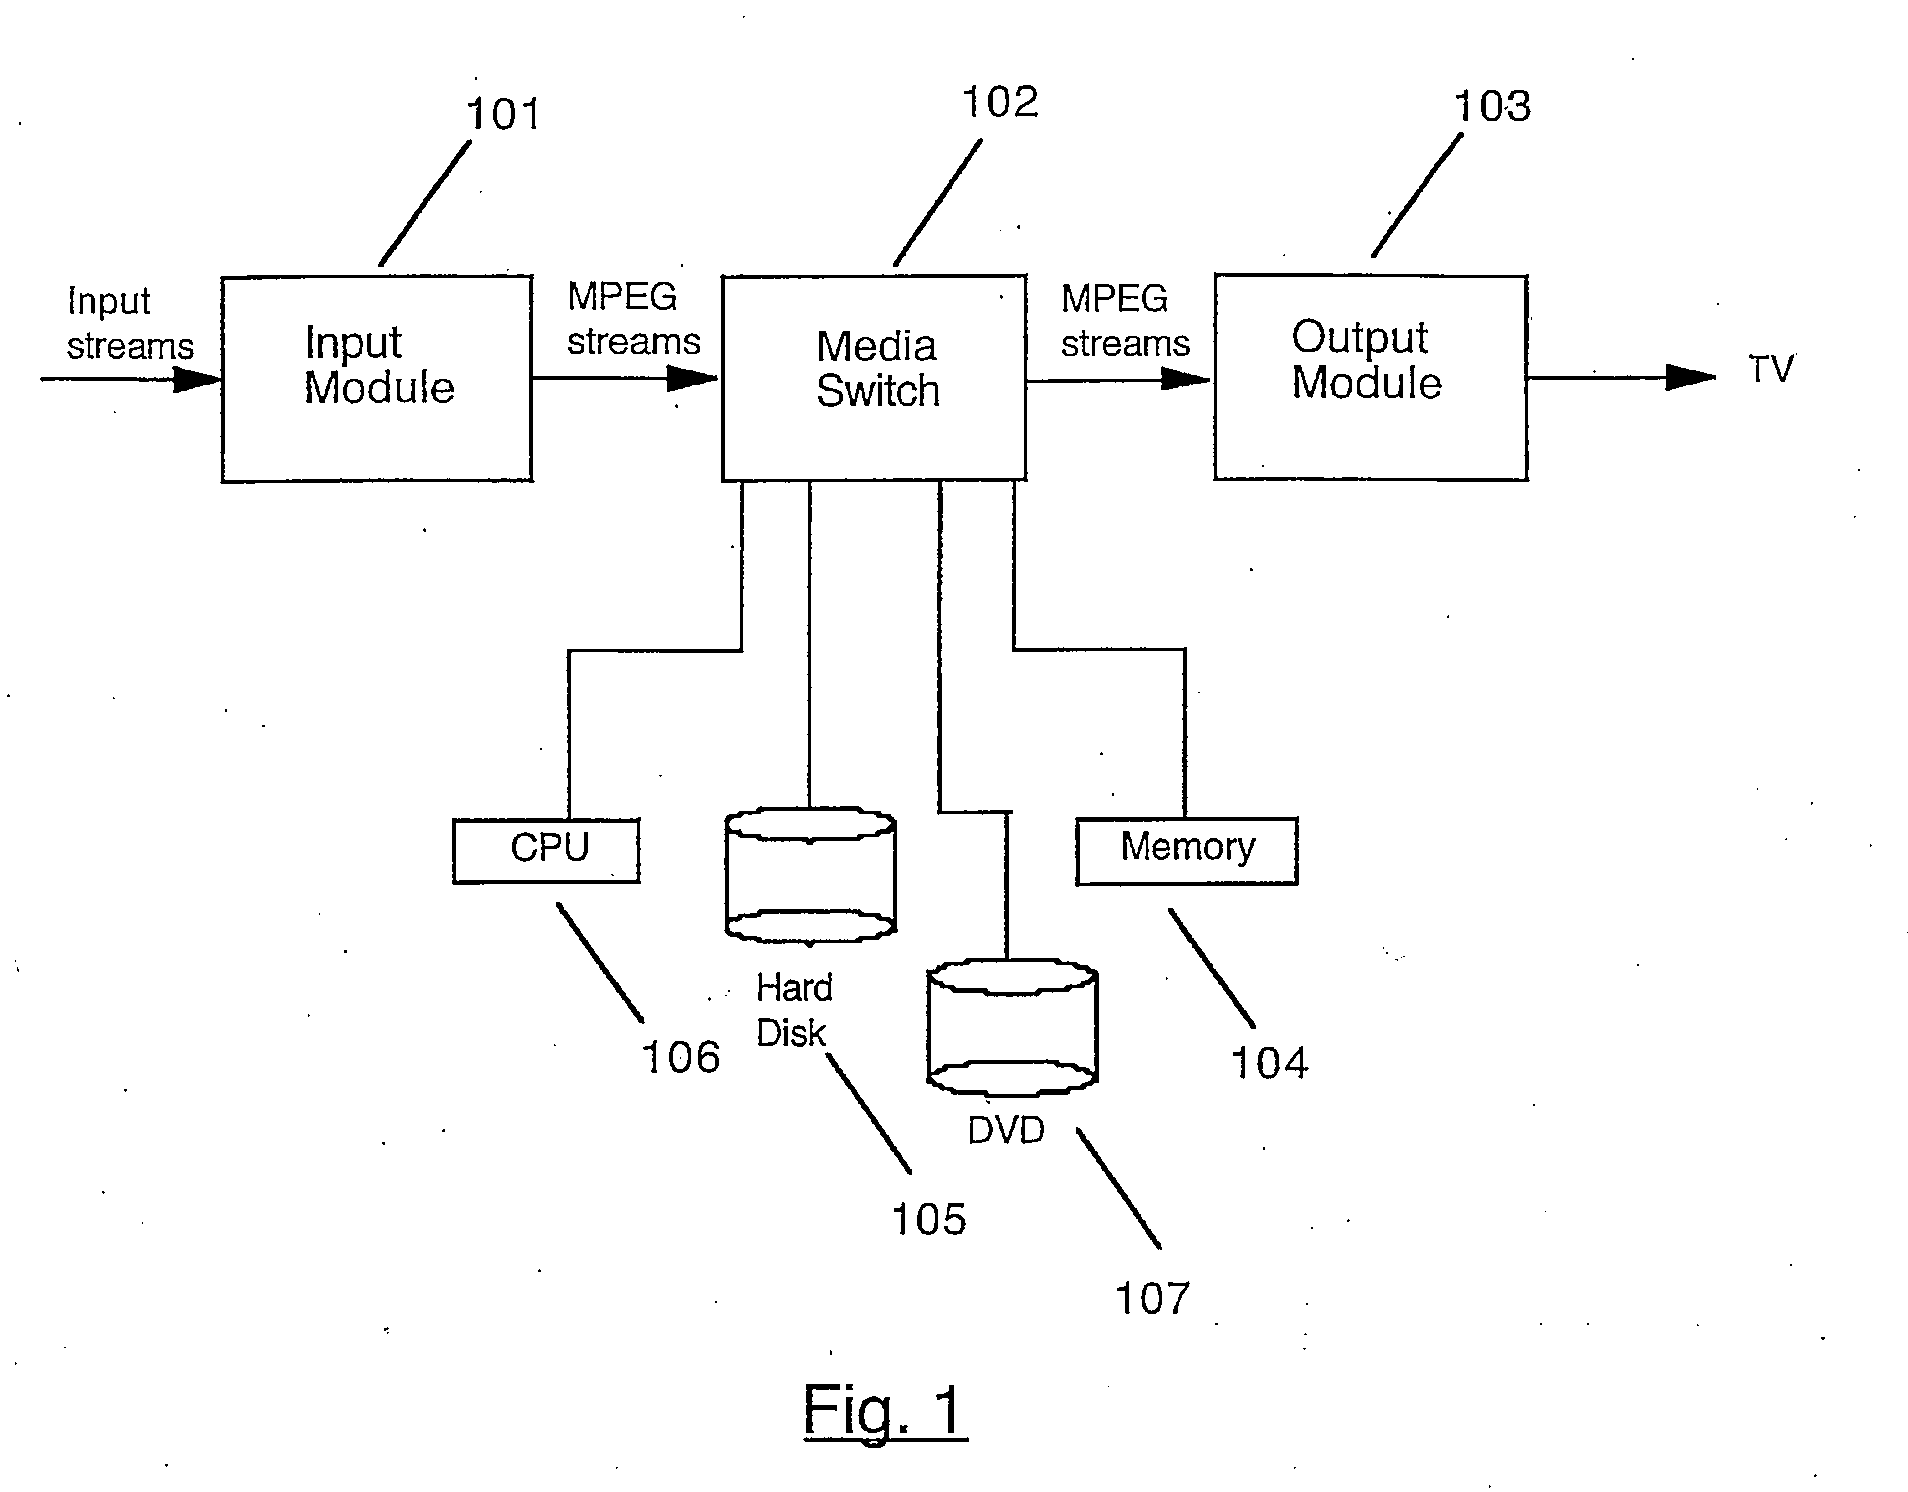 Digital video recorder system with an integrated DVD recording device